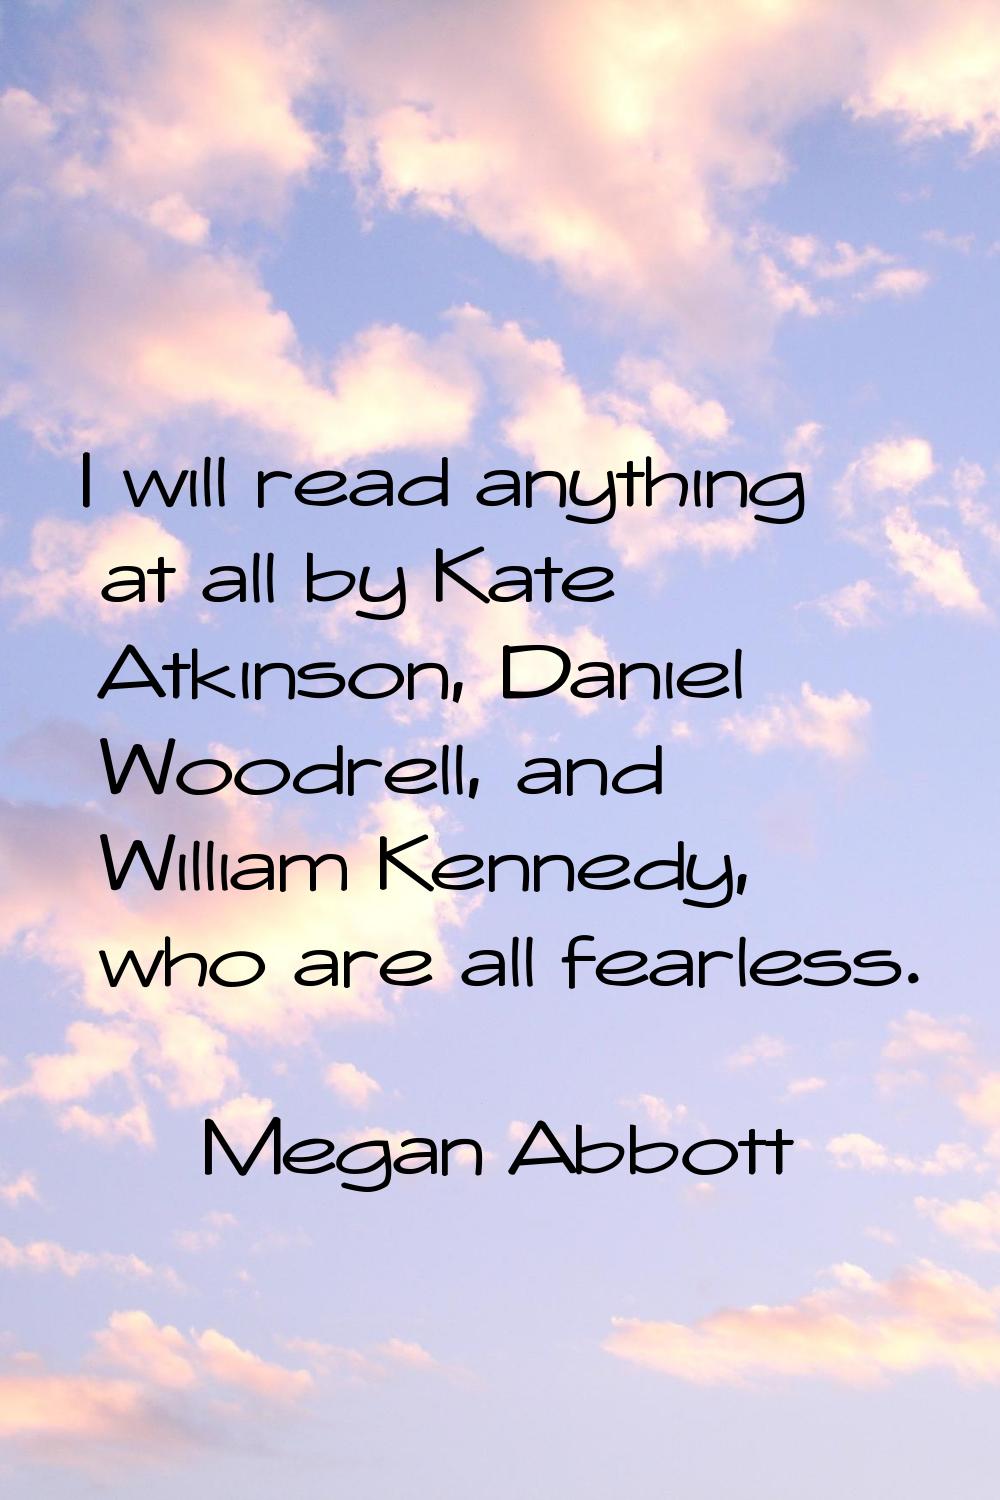 I will read anything at all by Kate Atkinson, Daniel Woodrell, and William Kennedy, who are all fea